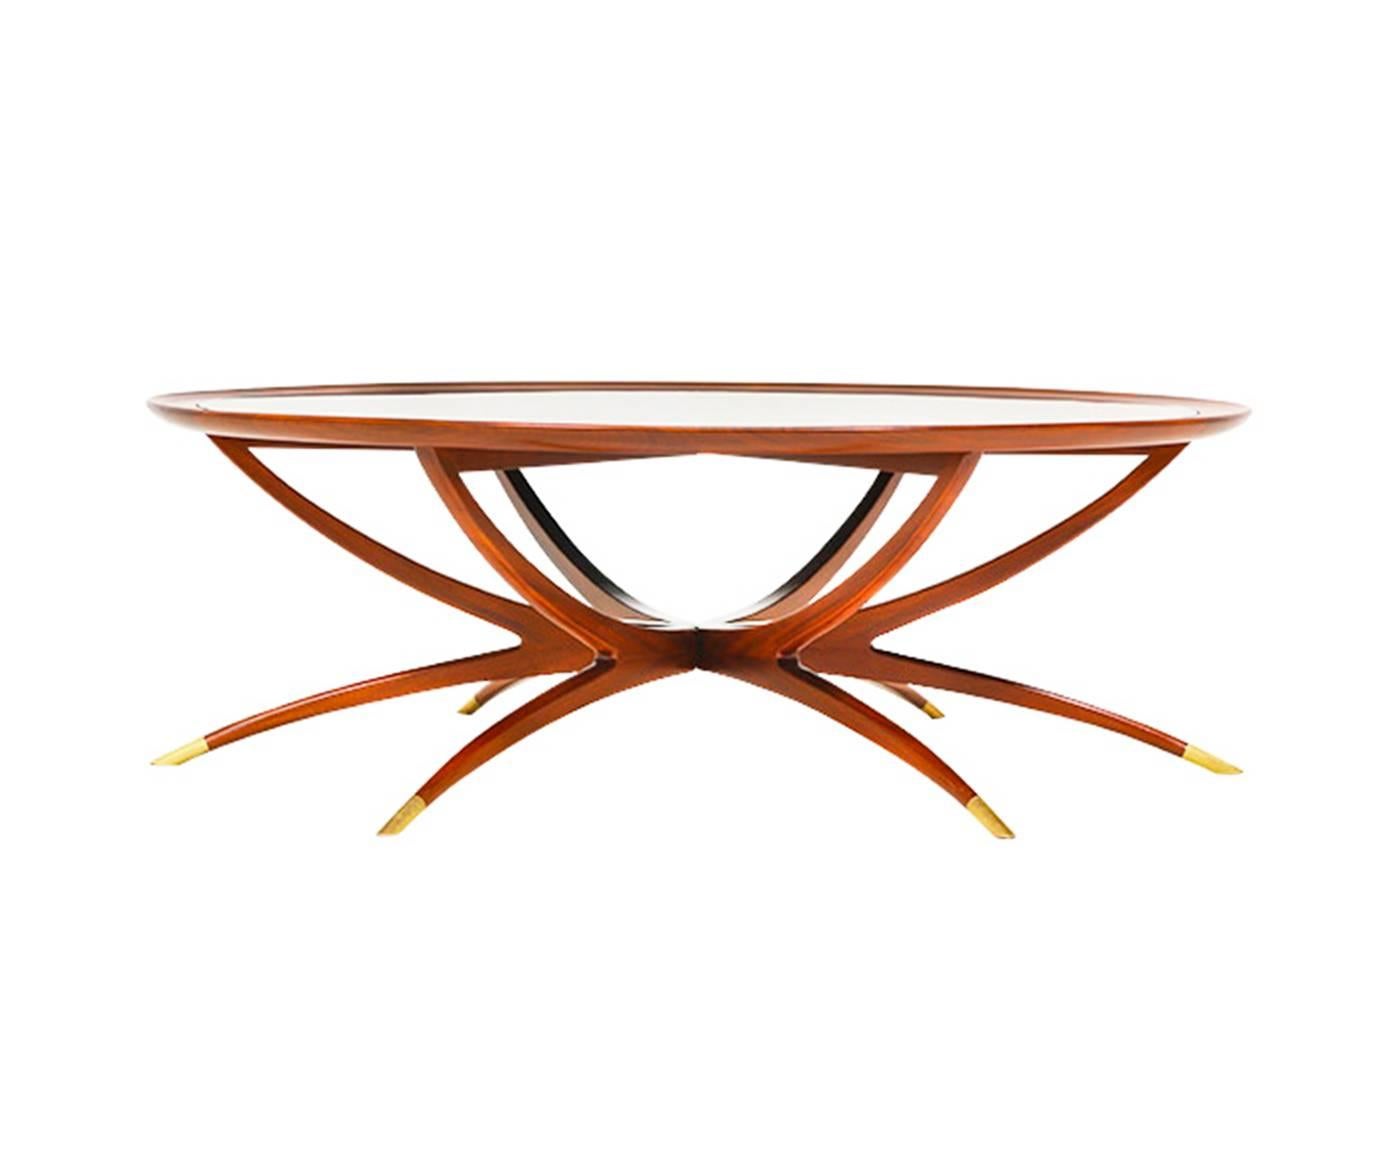 Designer: Selig.
Manufacturer: Selig.
Period/Style: Danish Modern.
Country: Denmark.
Date: 1950s.

Dimensions: 15.5″ H x 45″ W.
Materials: Teak, smoke glass.
Condition: Excellent, newly refinished.
Number of Items: 1.
ID number: 3000.